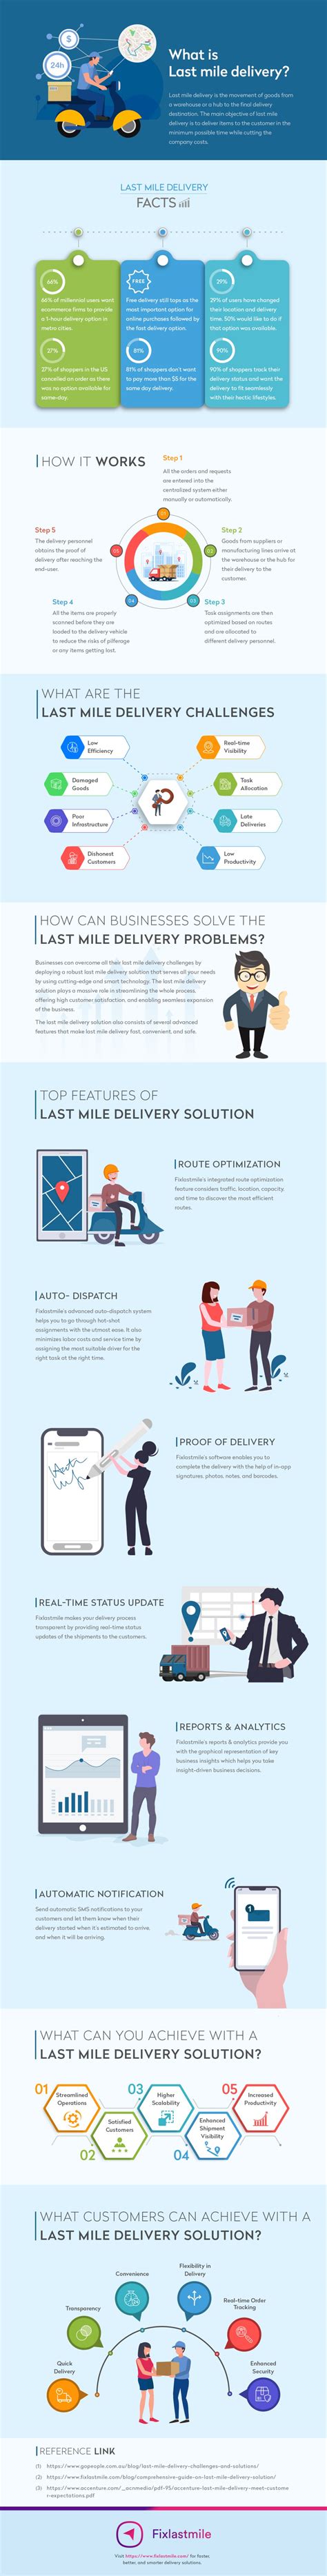 Last Mile Delivery Mechanisms Challenges And Solutions Infographic